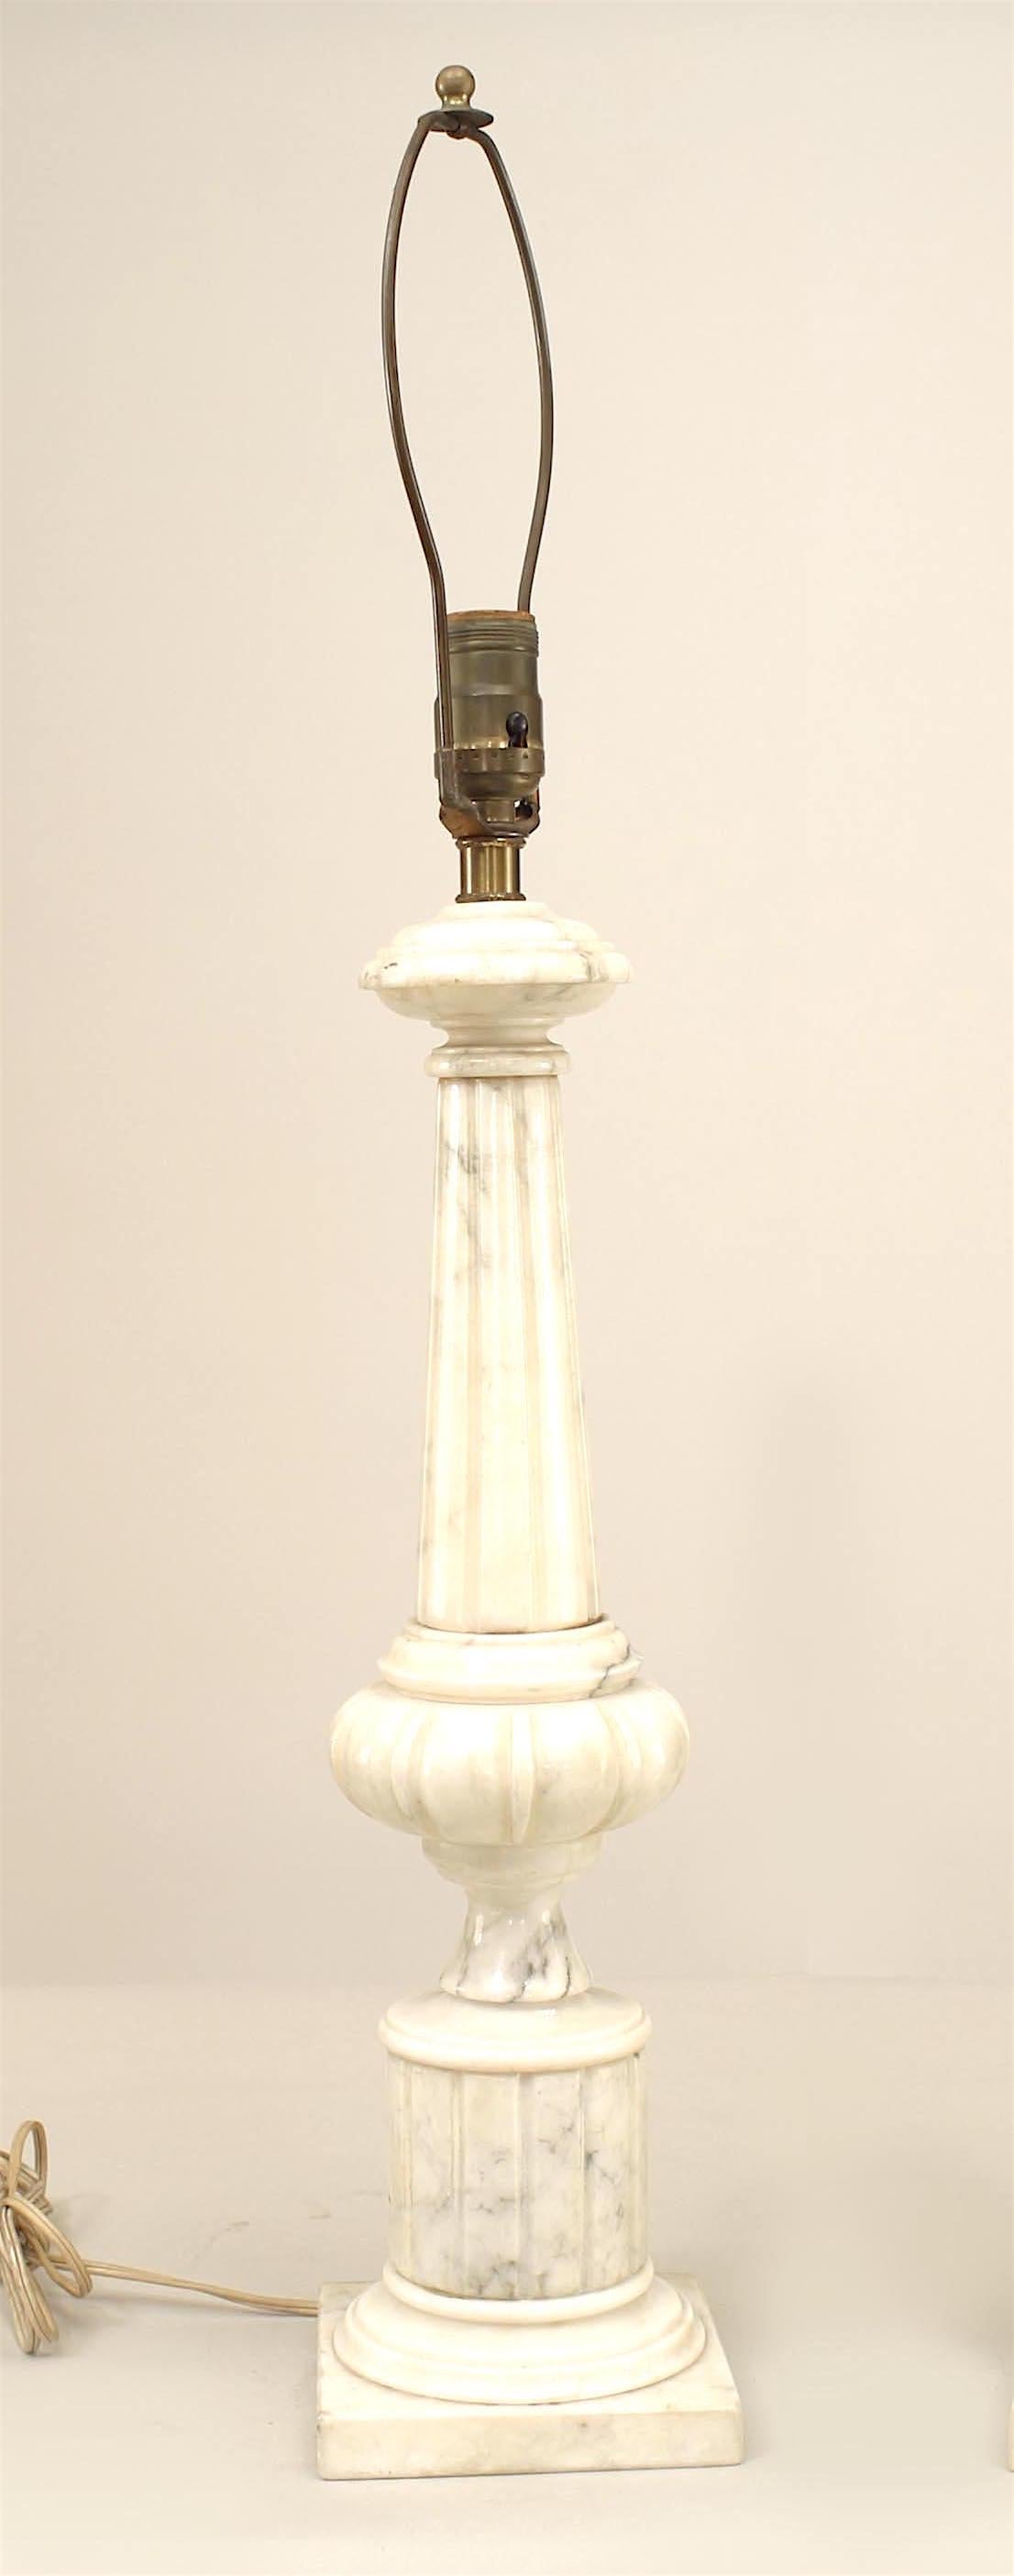 Pair of Italian Neo-classic style (20th Century) white alabaster lamps with a fluted column design supported on a square base (PRICED AS Pair).
